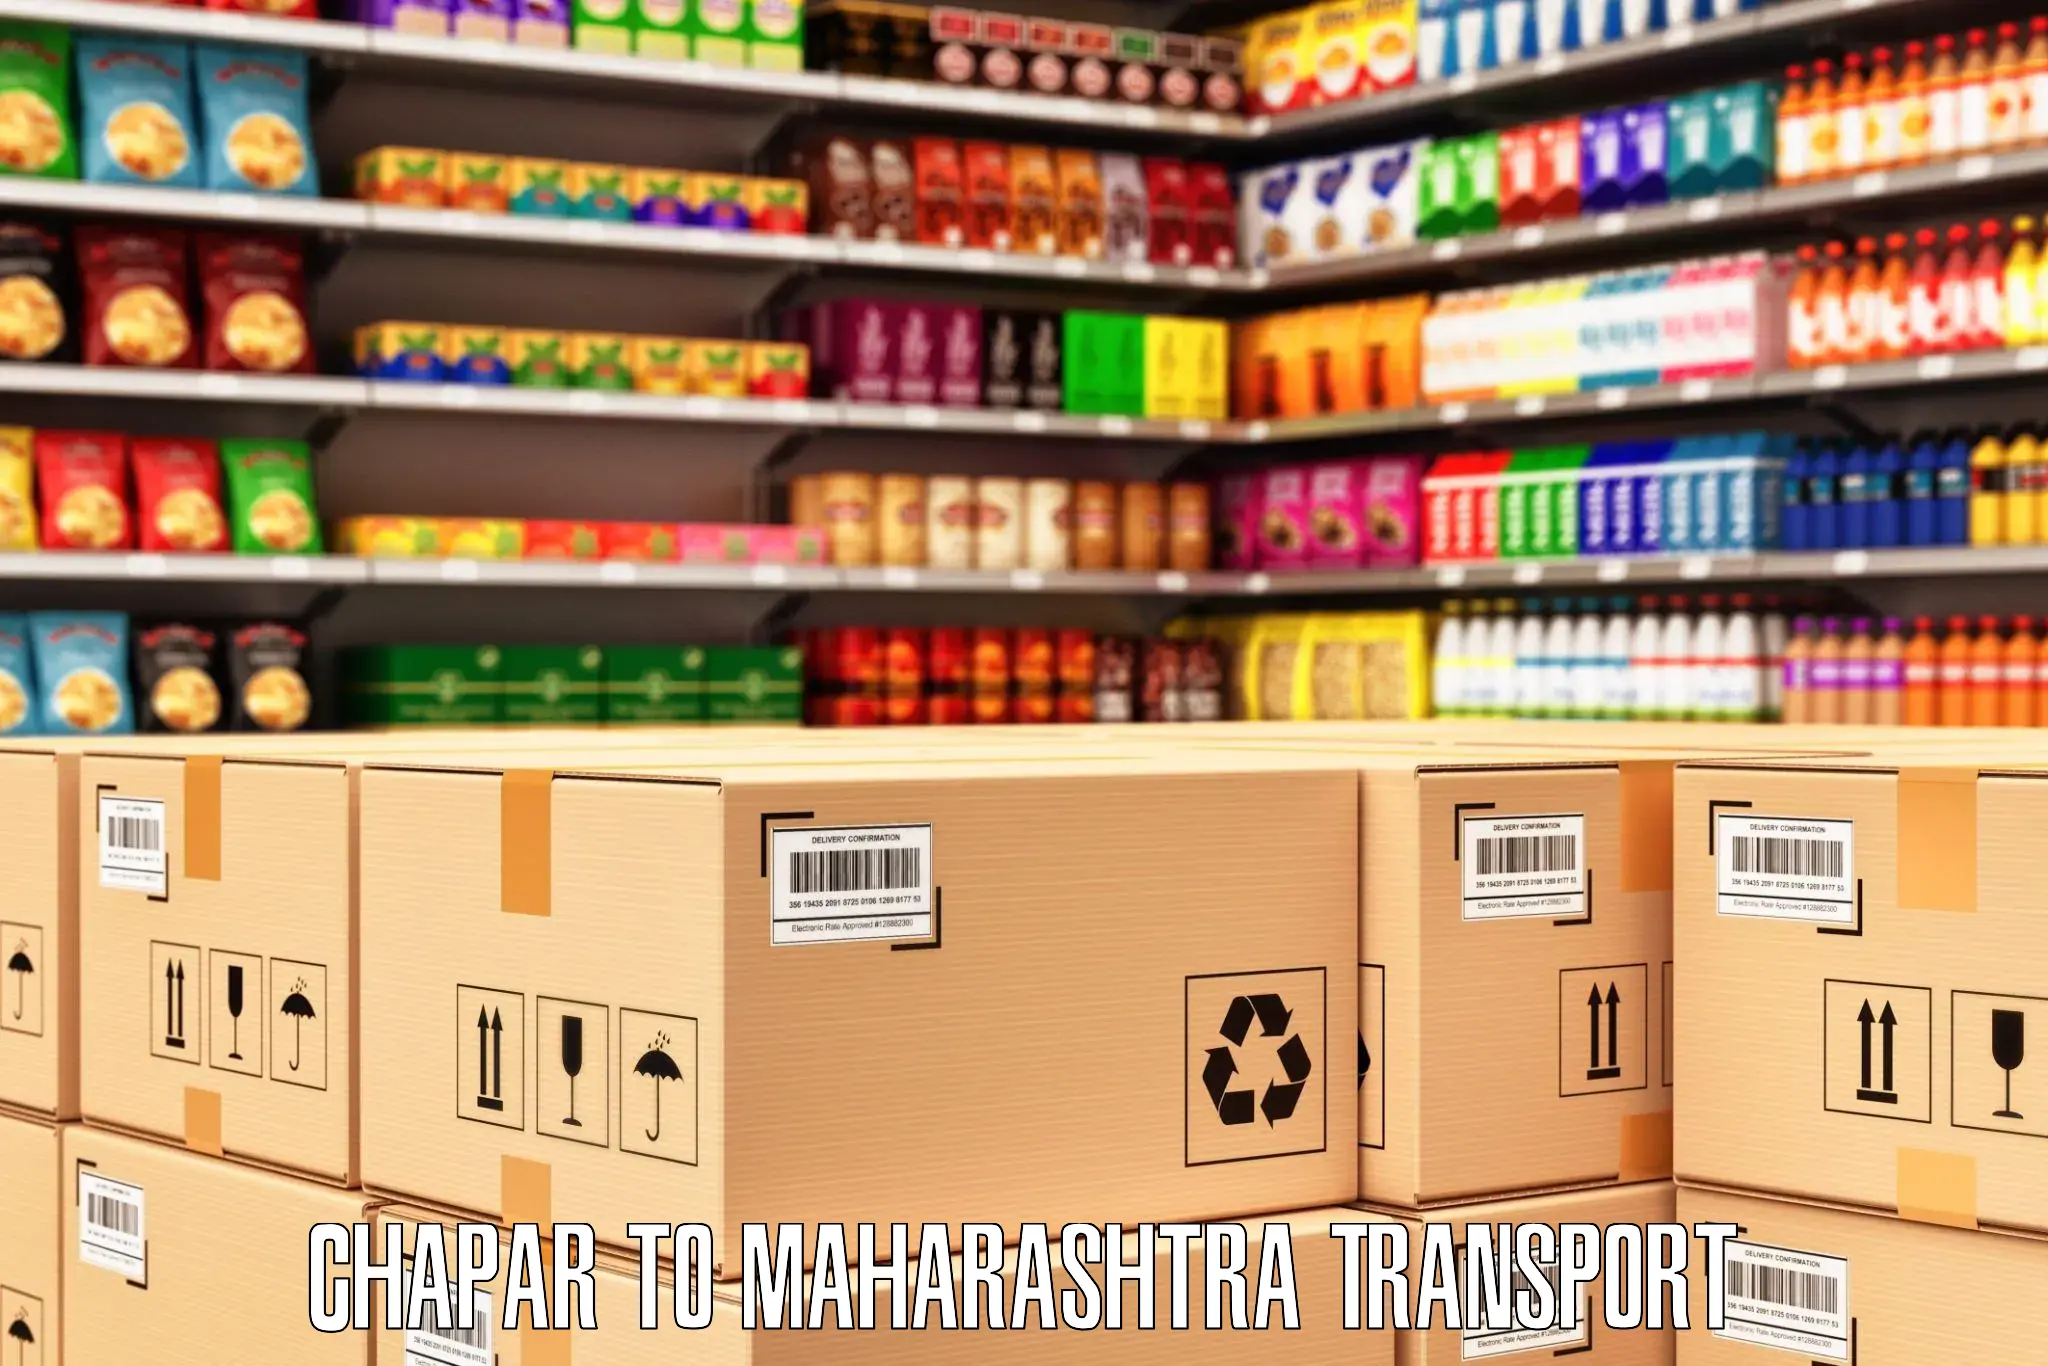 Truck transport companies in India Chapar to Mangaon